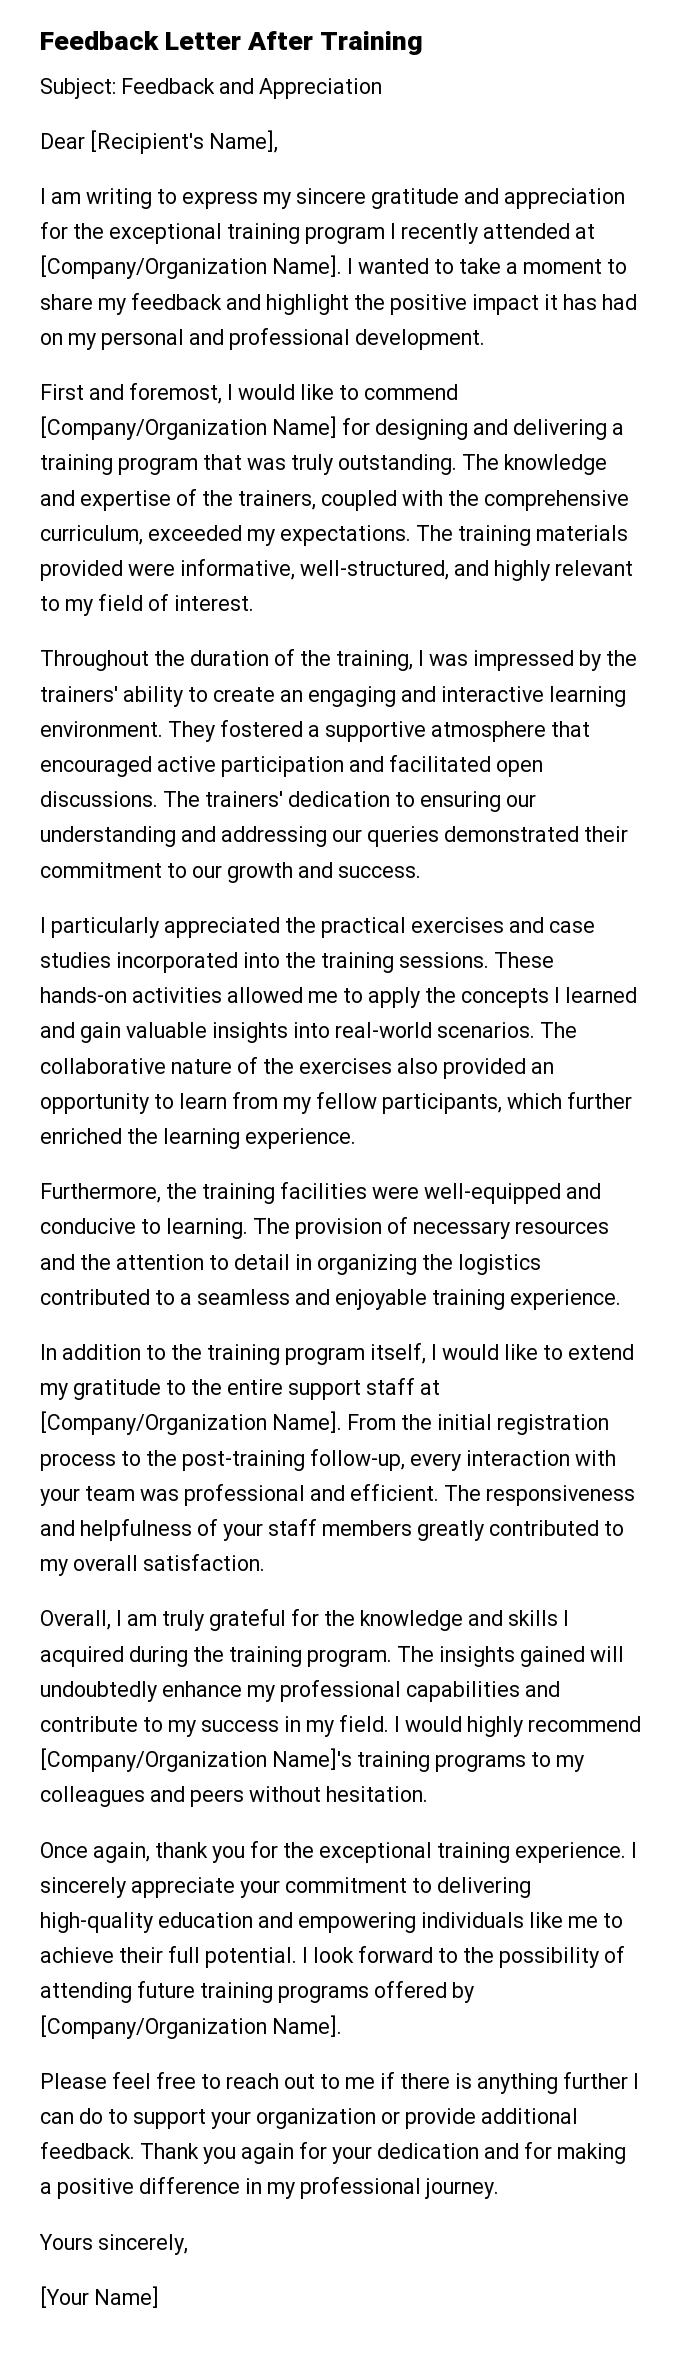 Feedback Letter After Training